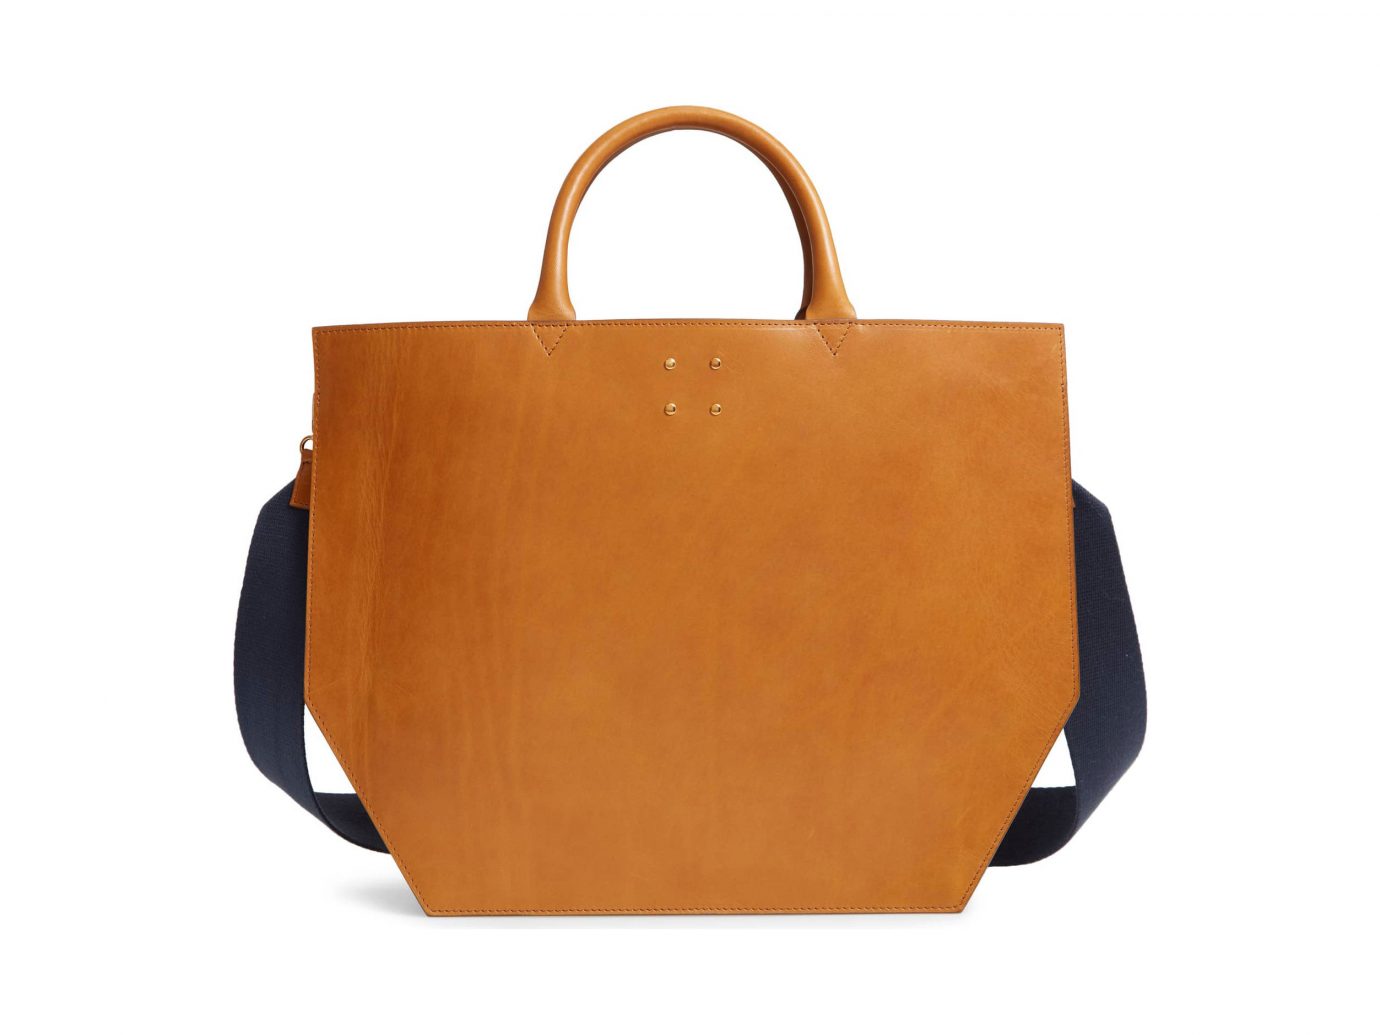 TRADEMARK Collapsing Leather Tote